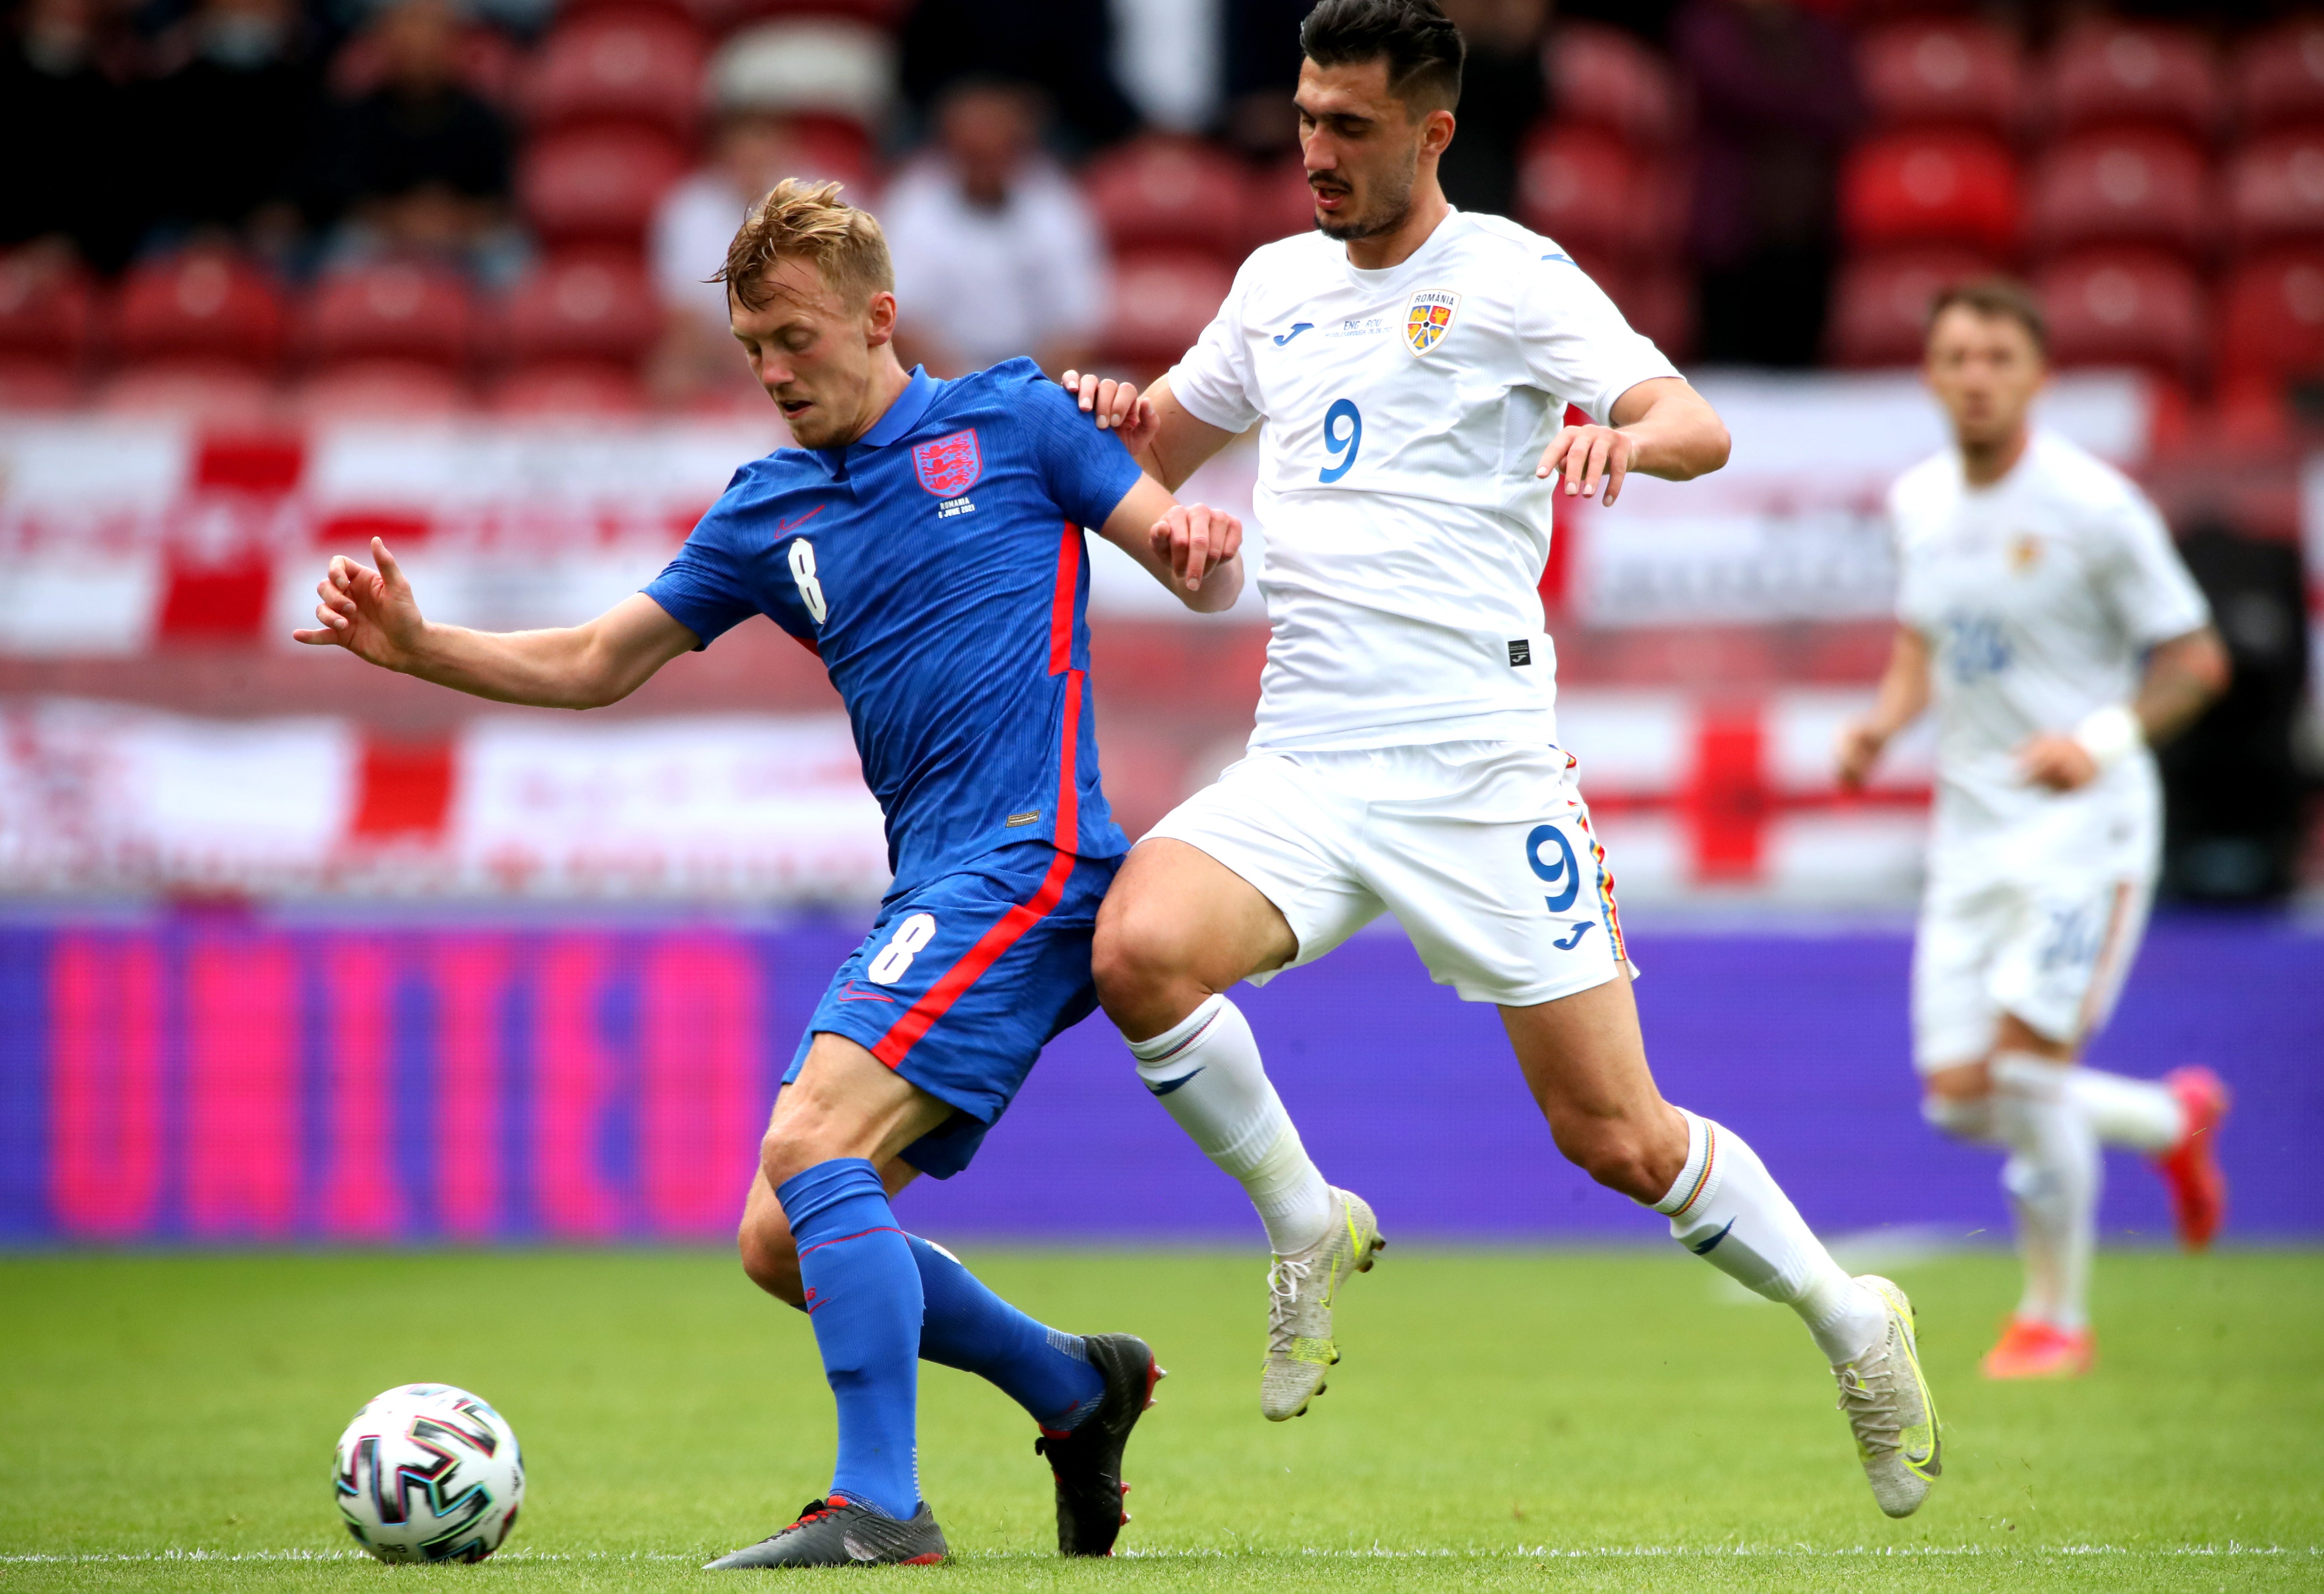 Ward-Prowse impressed during England’s warm-up games for Euro 2020 but did not make the final squad (Nick Potts/PA)